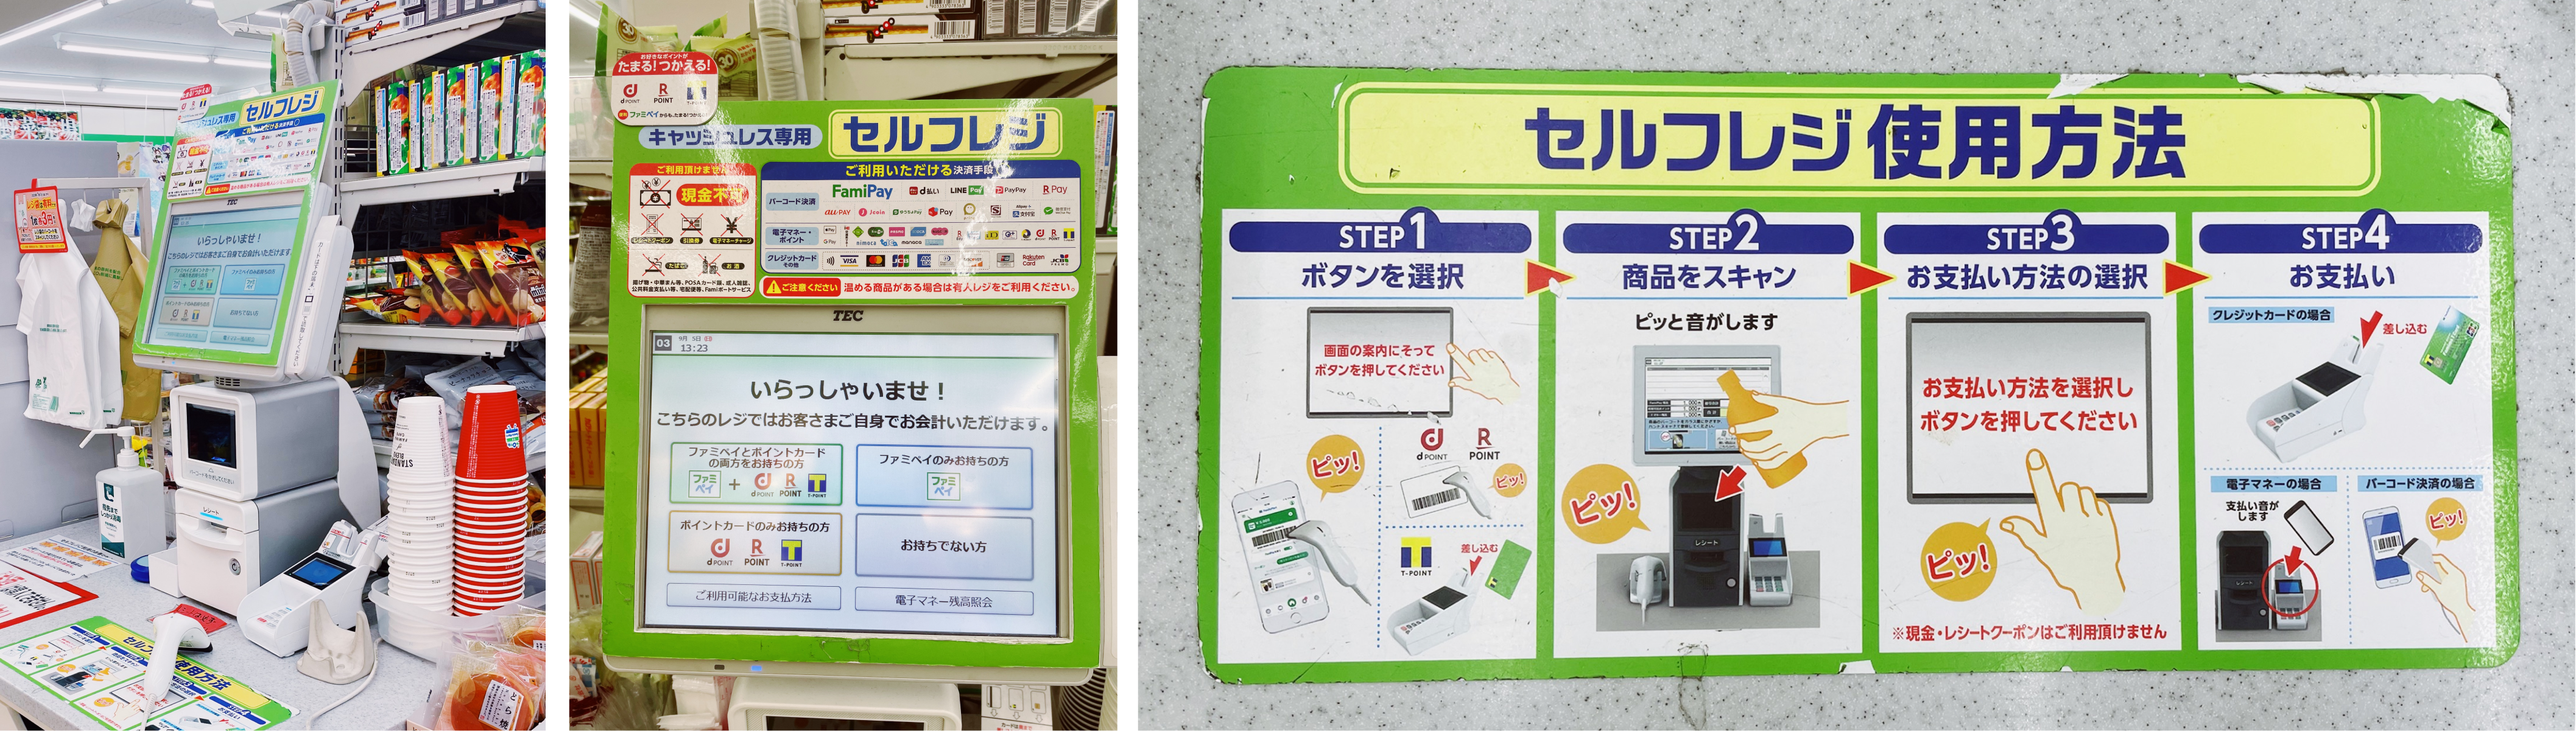 L-R, One: Photograph of a self-service checkout inside a FamilyMart store. Two: Photograph of the FamilyMart self-service checkout sign and screen showing the available payment options. Three: Photograph of the instructions for using the FamilyMart self-service checkout.